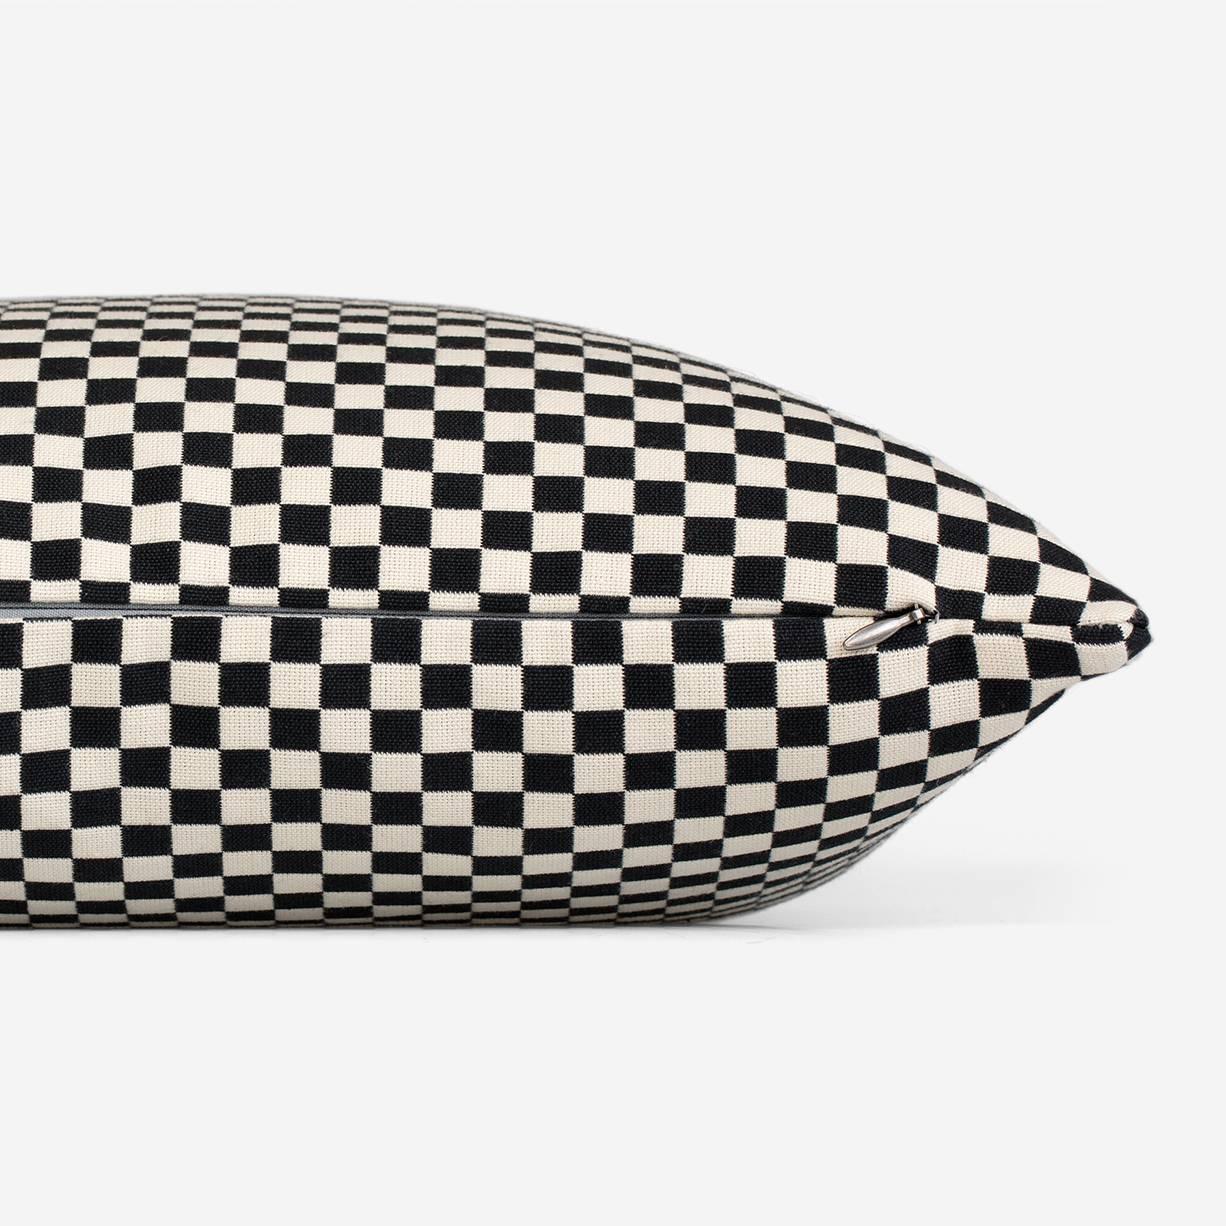 Maharam Pillow
Checker by Alexander Girard
008 Black/White

Designed by Alexander Girard for the Herman Miller textile division in 1965, checker is a simple checkerboard design offered in an array of colors. The double-weave construction allows the